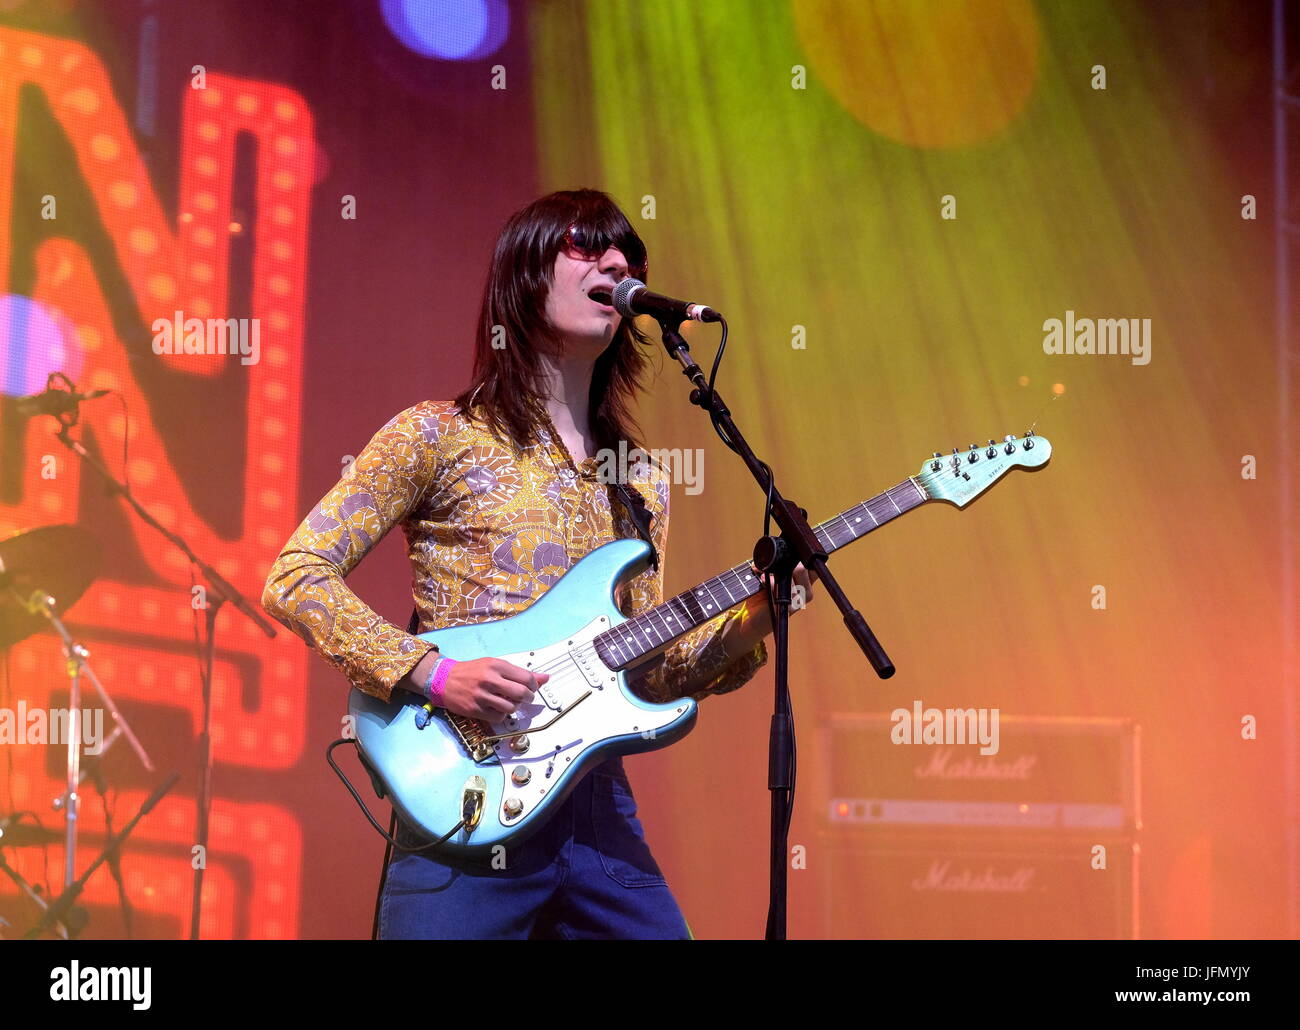 American pop band the Lemon Twigs performing at Glastonbury Festival June 23 2017 Day 3 Stock Photo